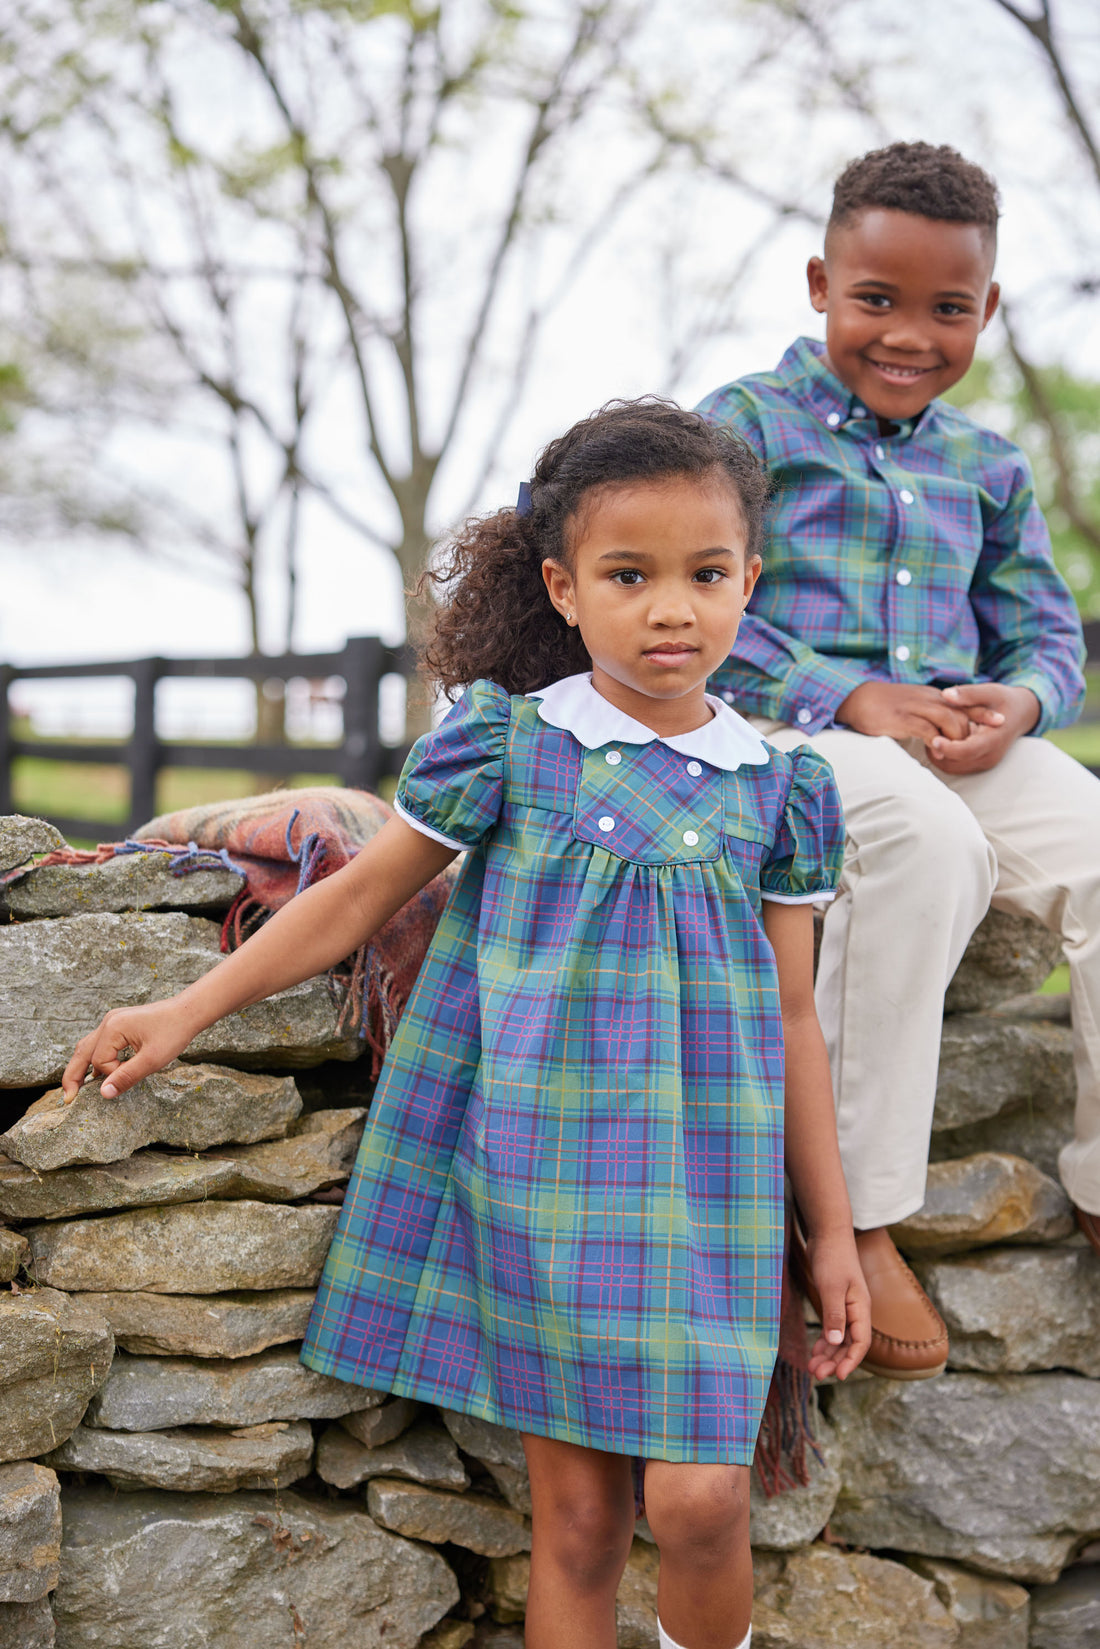 Little English classic tween girl dress in ashford tartan pattern with white buttons on chest and scallop collar